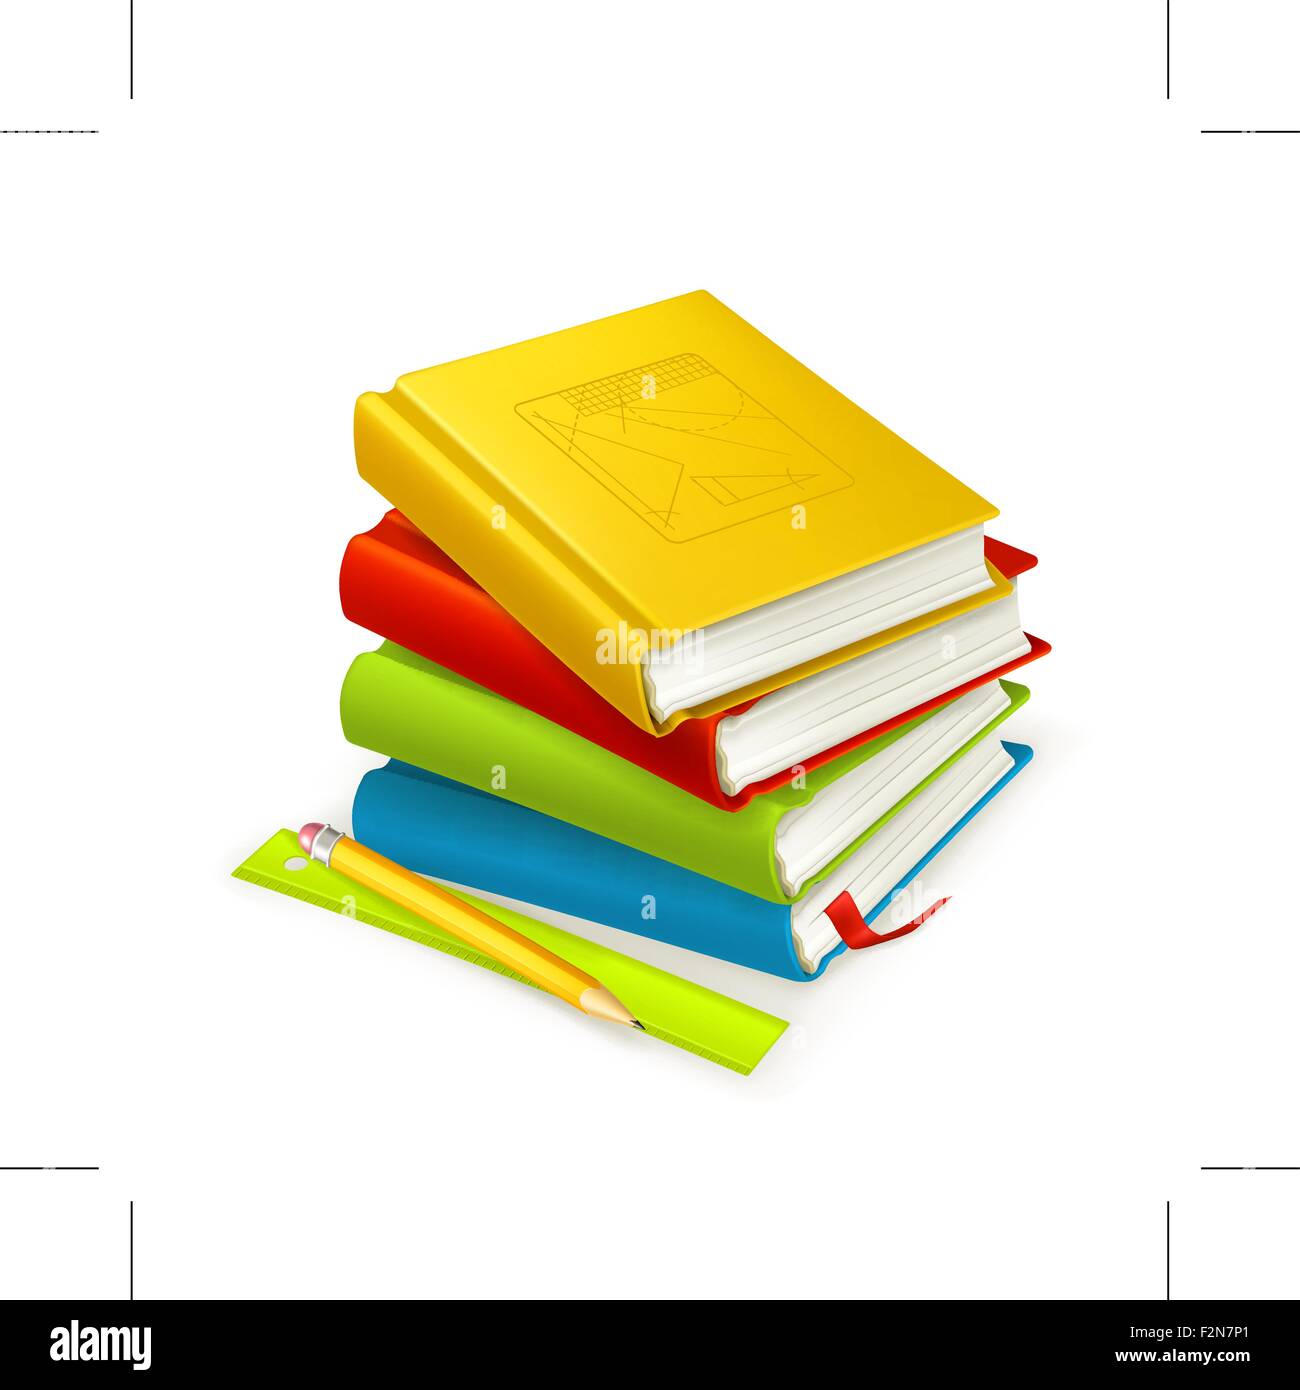 Stack of textbooks. Eps10 vector illustration contains transparency and blending effects. Stock Vector